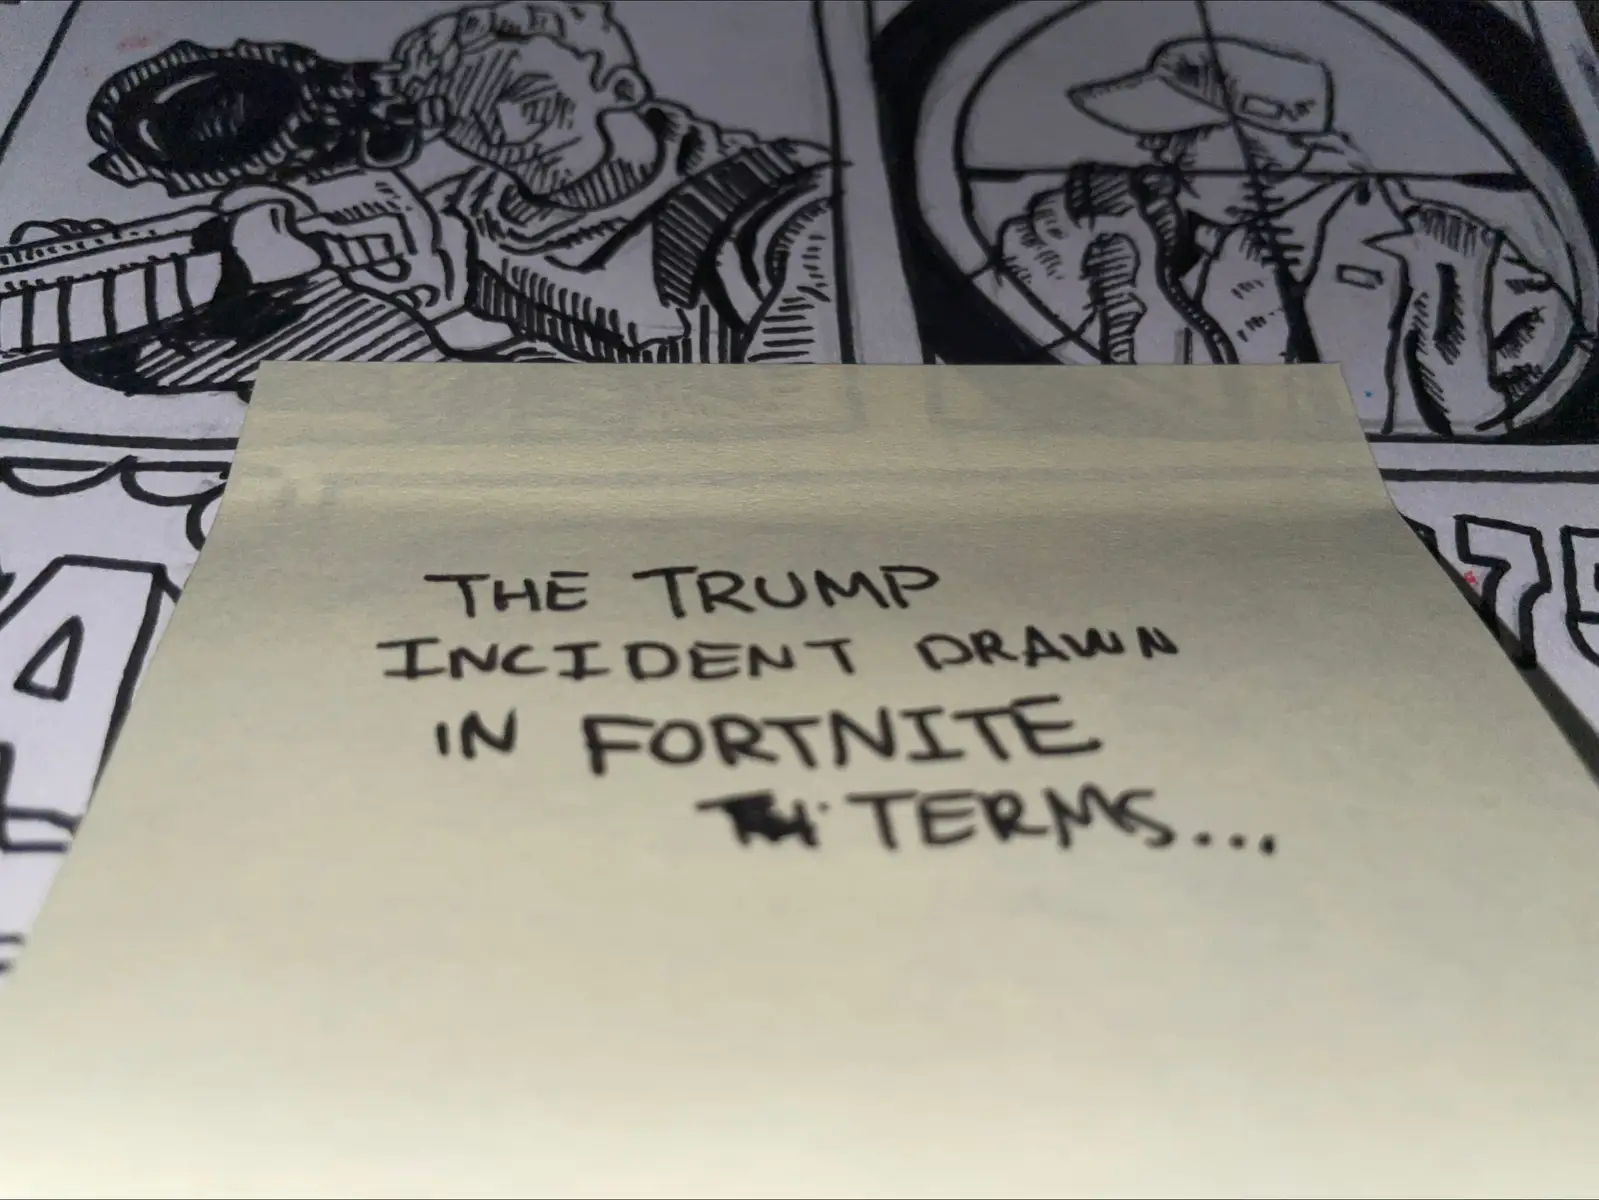 This is a simplified version of what happened to Donald Pump this week #fortnite #meme #drawing #trump